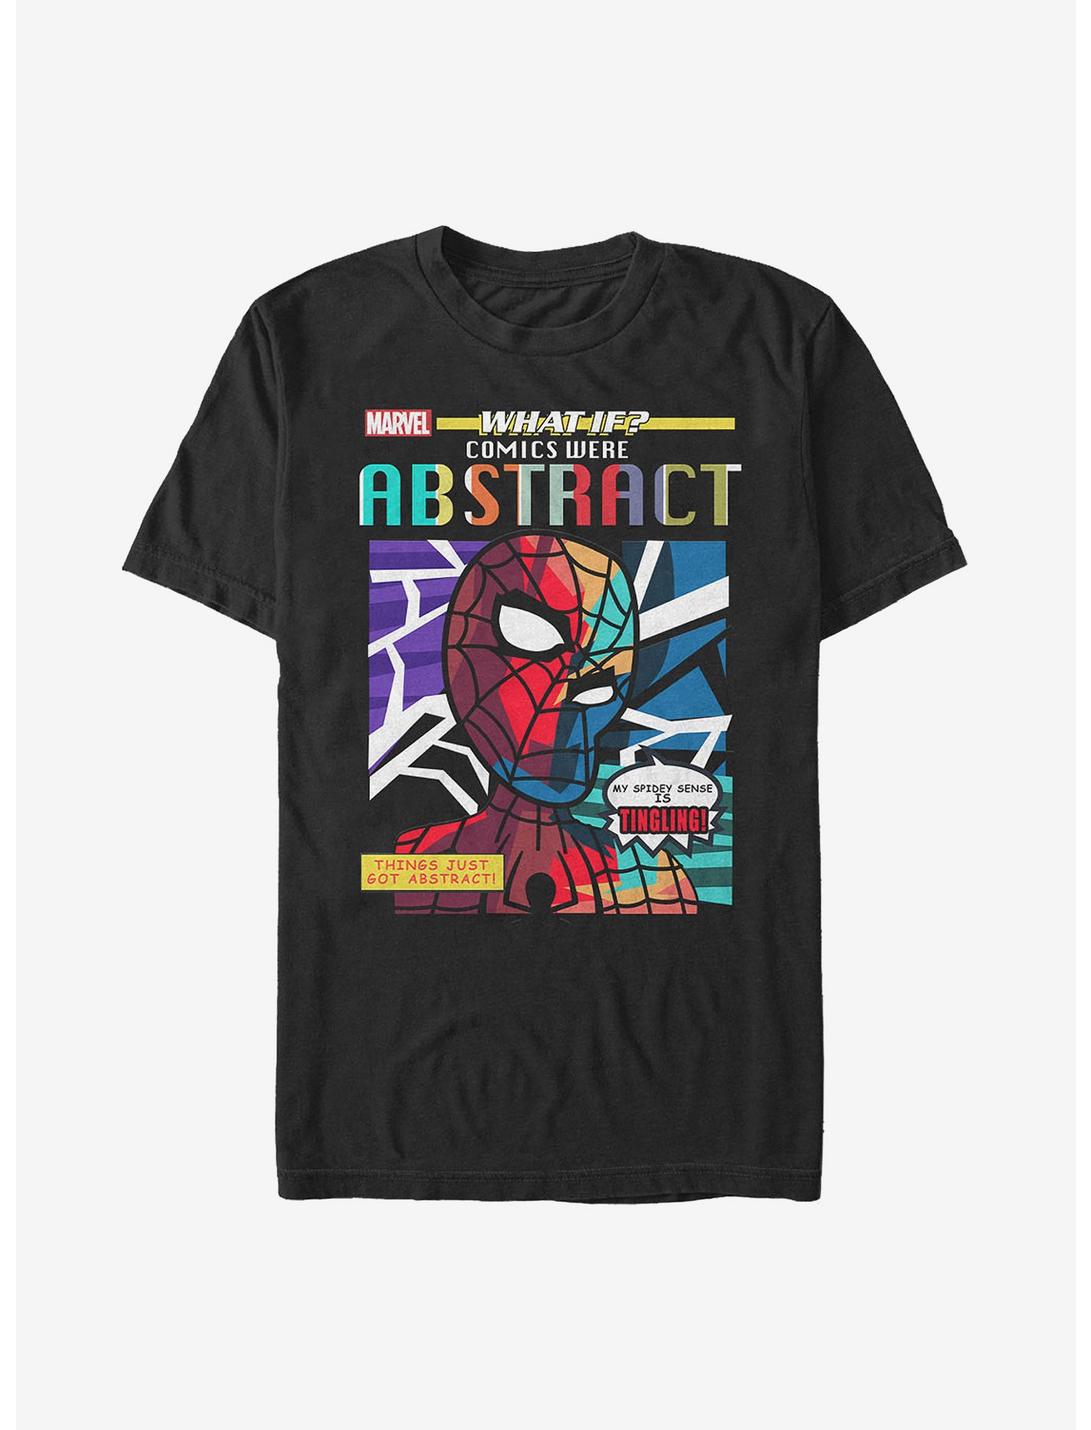 Plus Size Marvel What If?? Comics Were Abstract Spider-Man T-Shirt, BLACK, hi-res